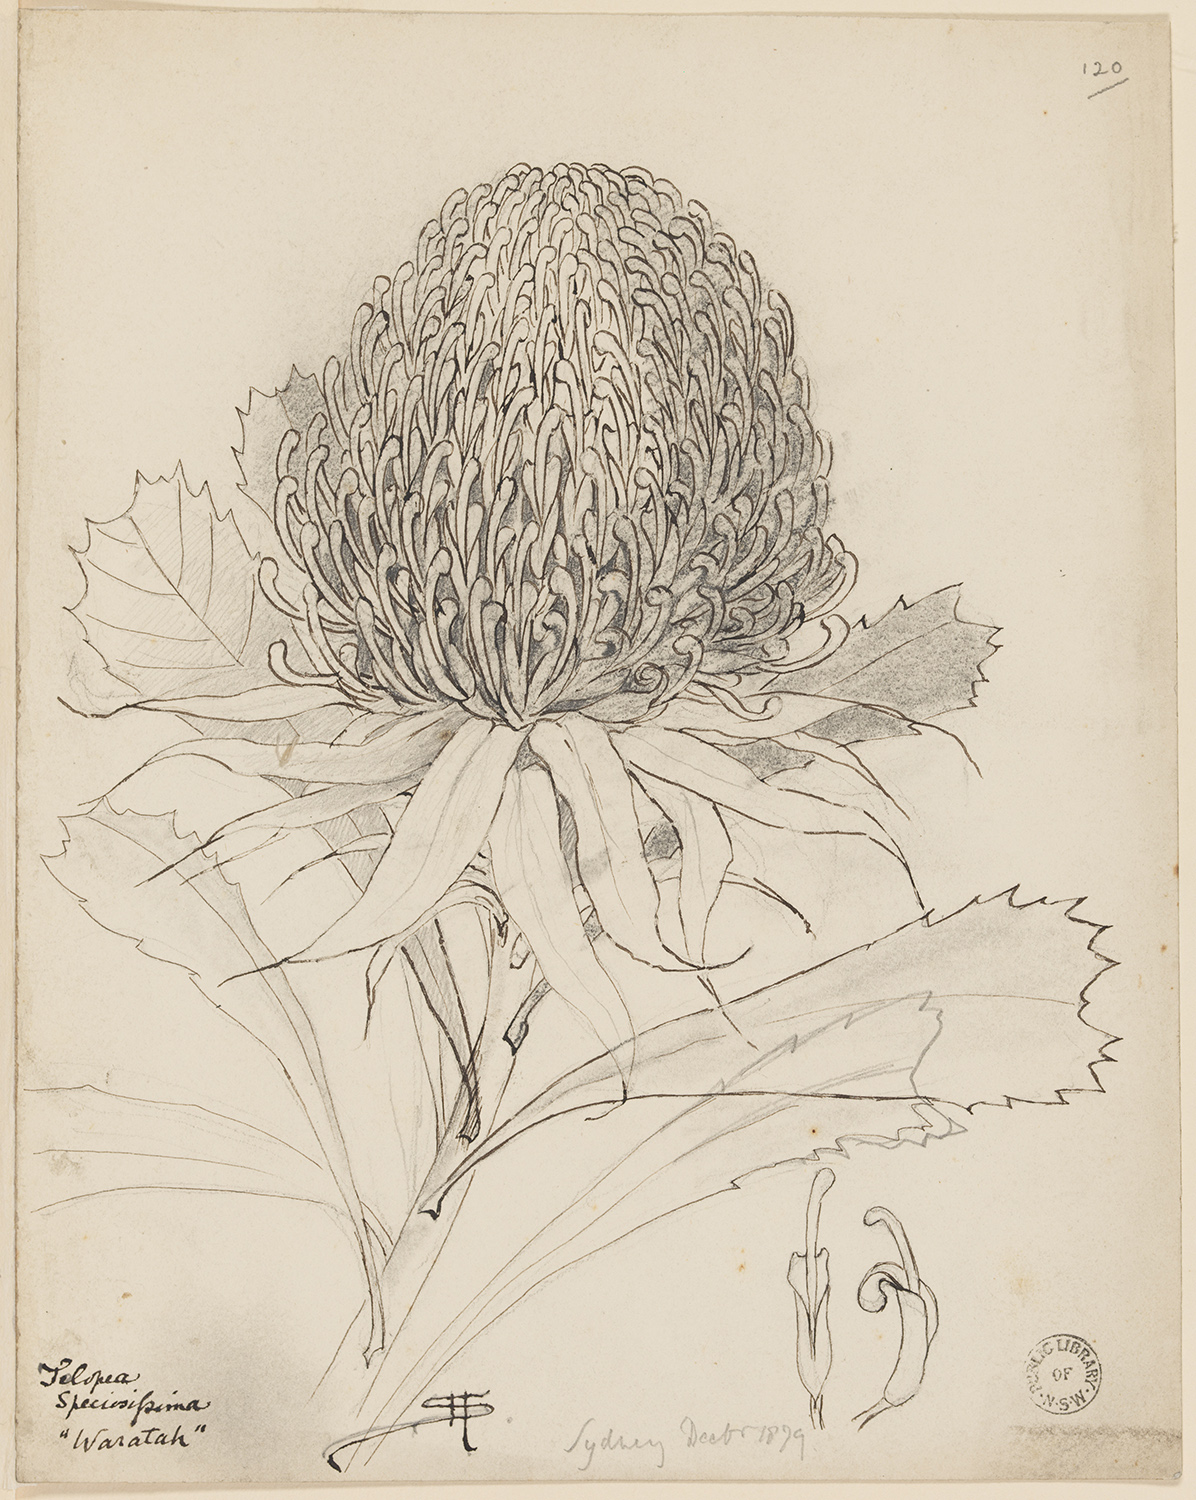 A black and white pencil drawing of a waratah with detail of individual petals.